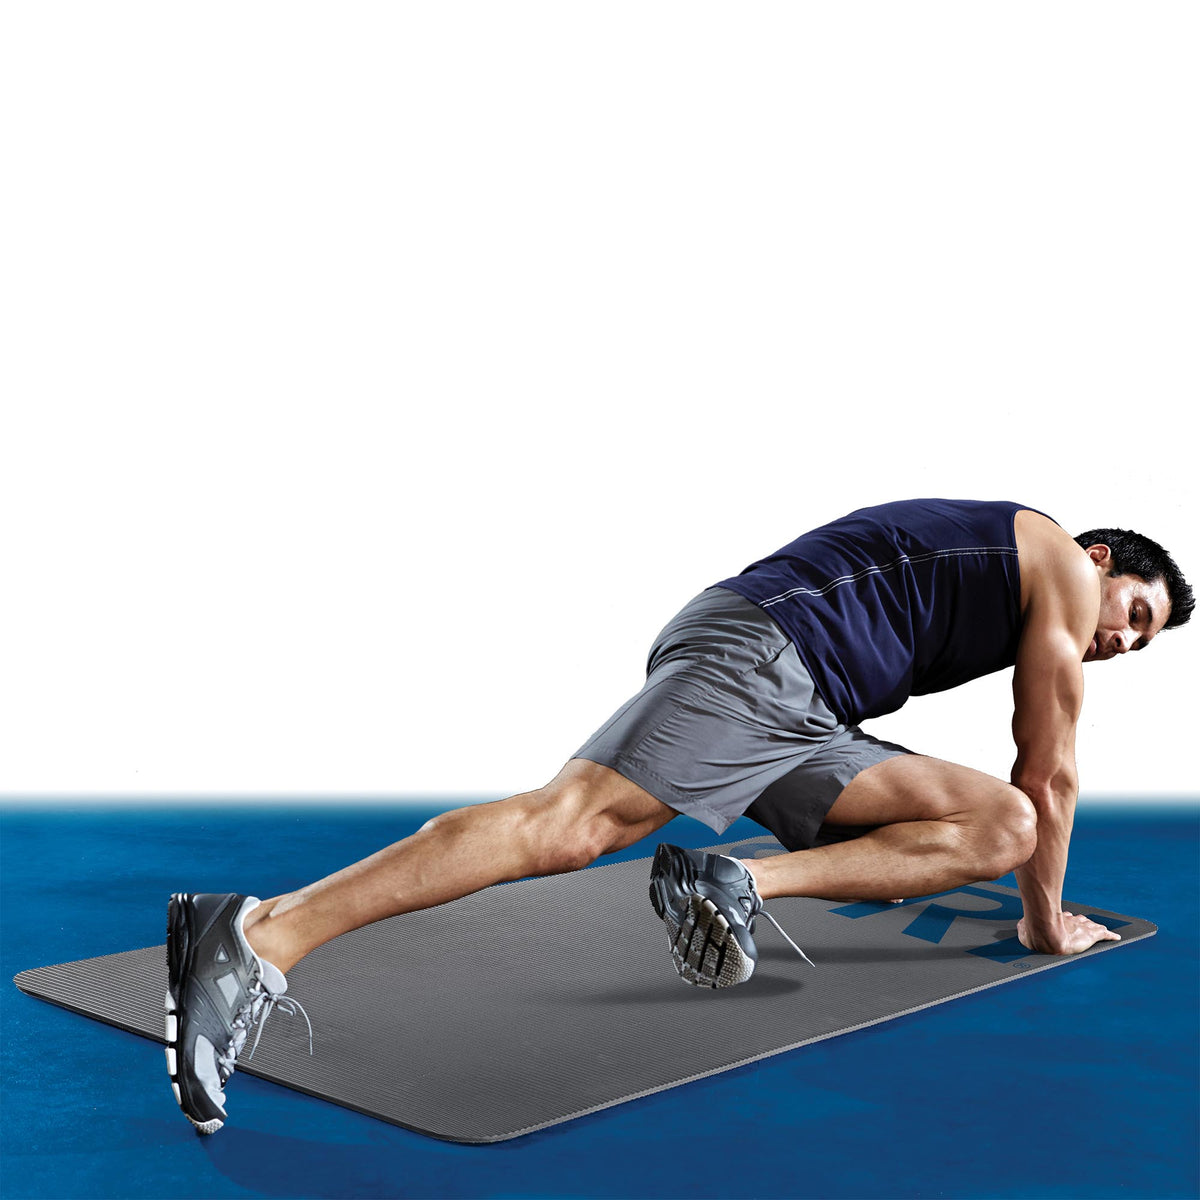 12mm Pro Fitness Mat in use